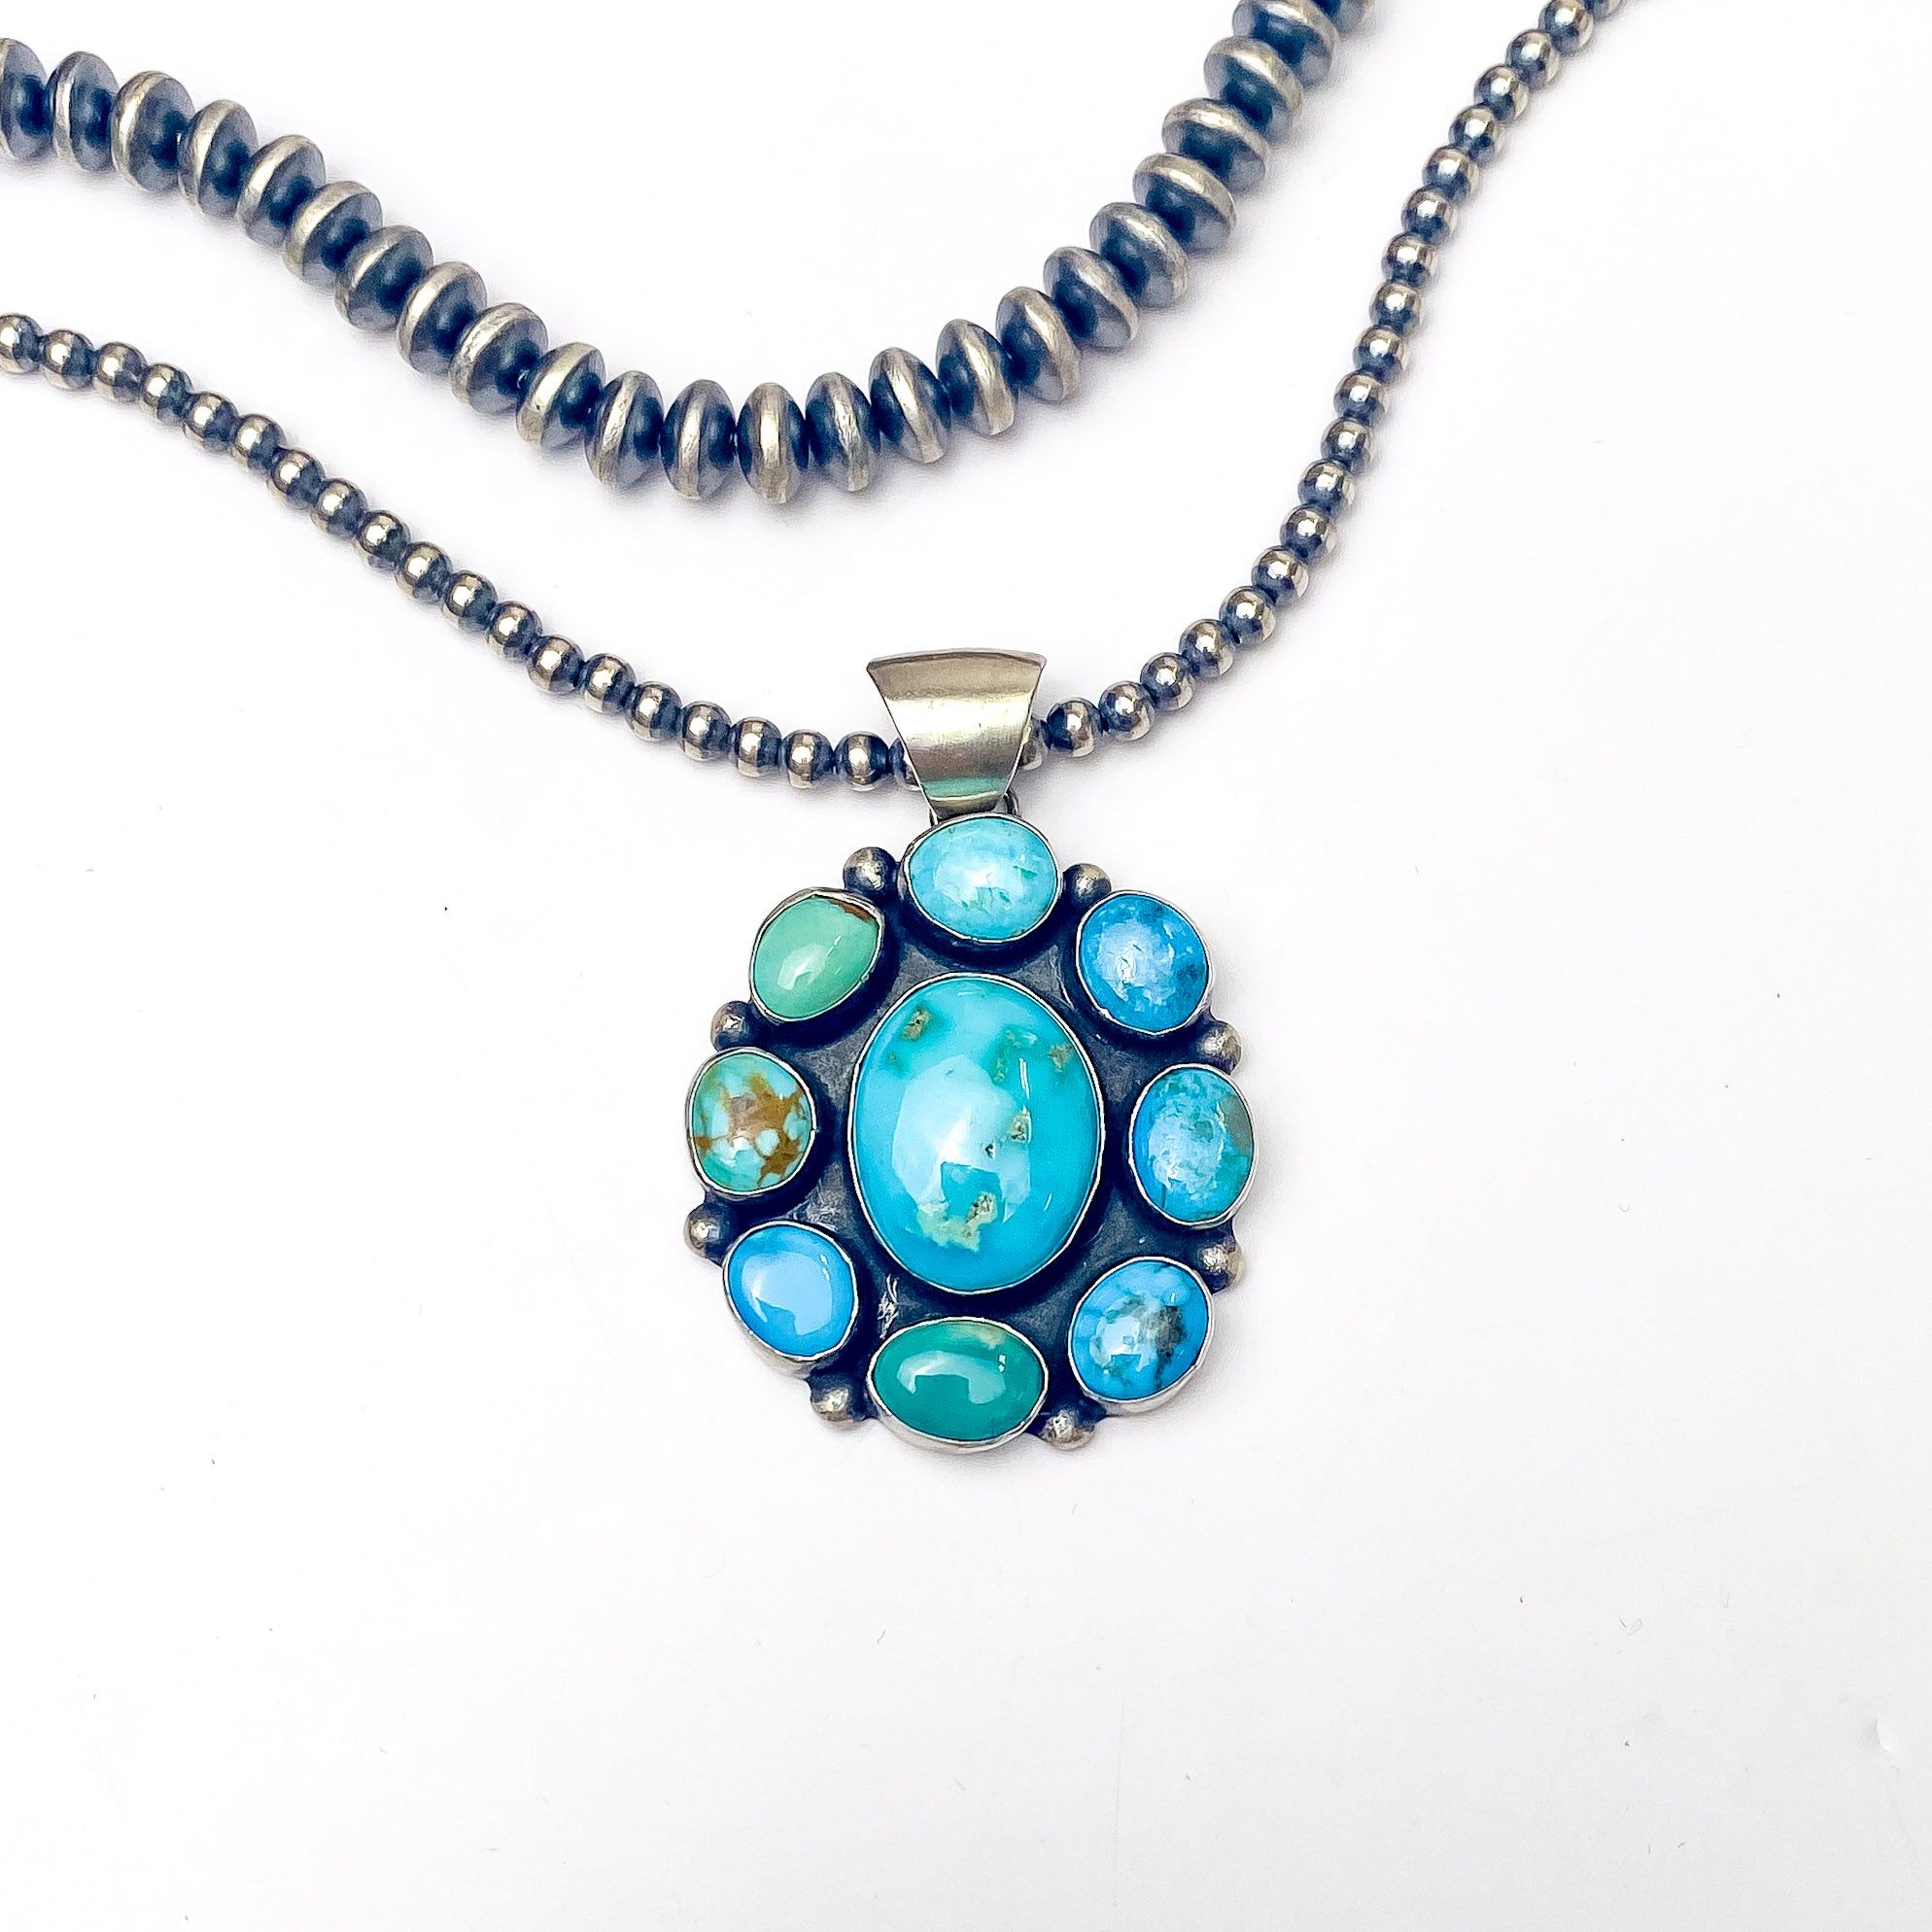 In the picture is a navajo handmade sterling silver circle pendant with kingman turquoise with a white background